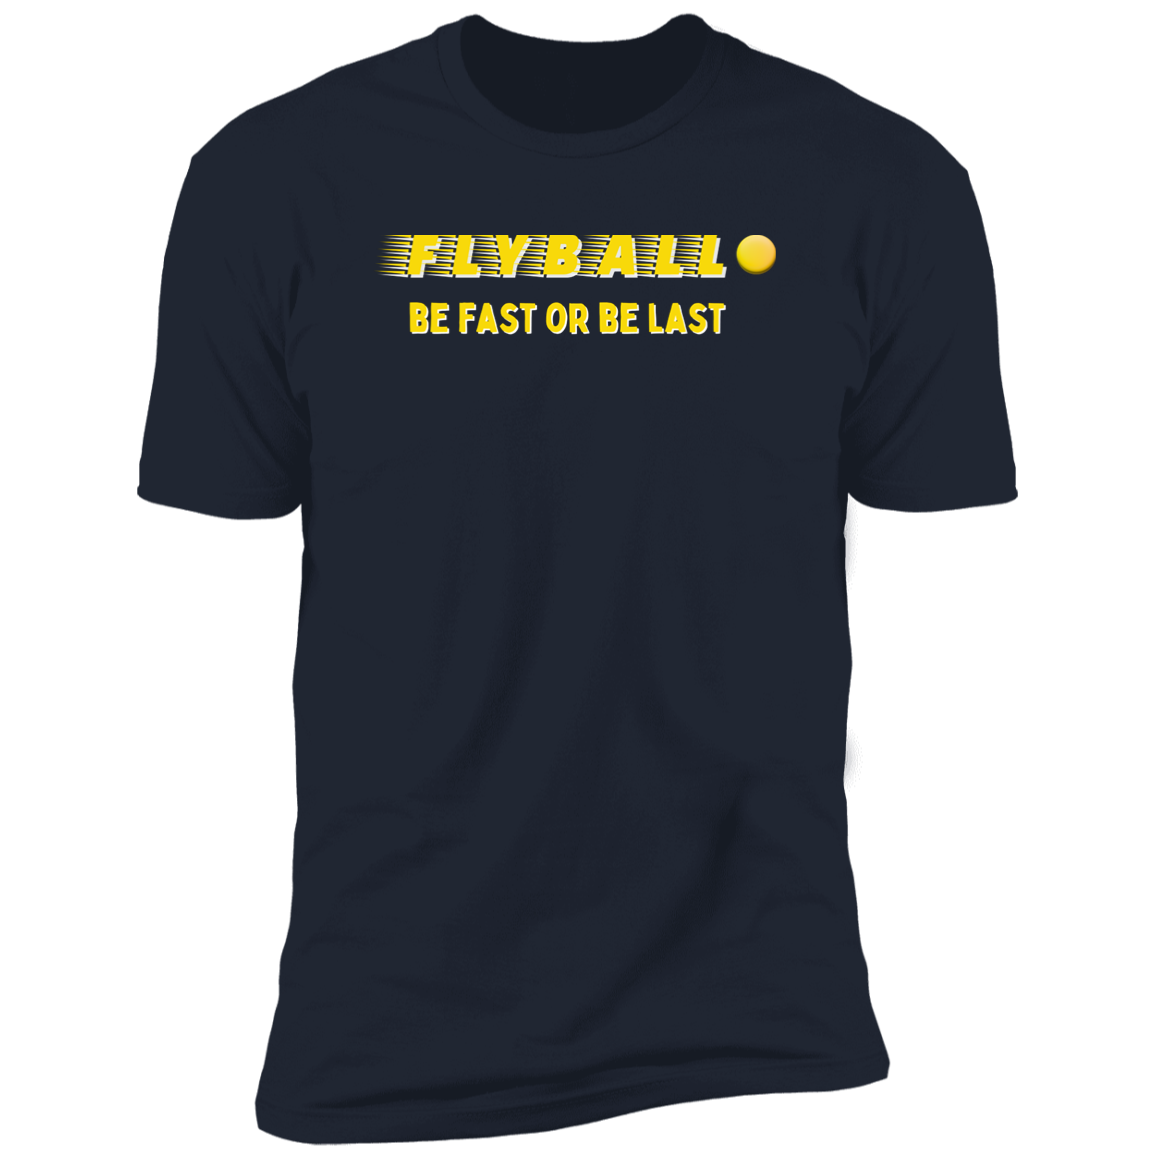 Flyball Be Fast or Be Last Dog Sport T-shirt, Flyball Shirt for humans, in navy blue